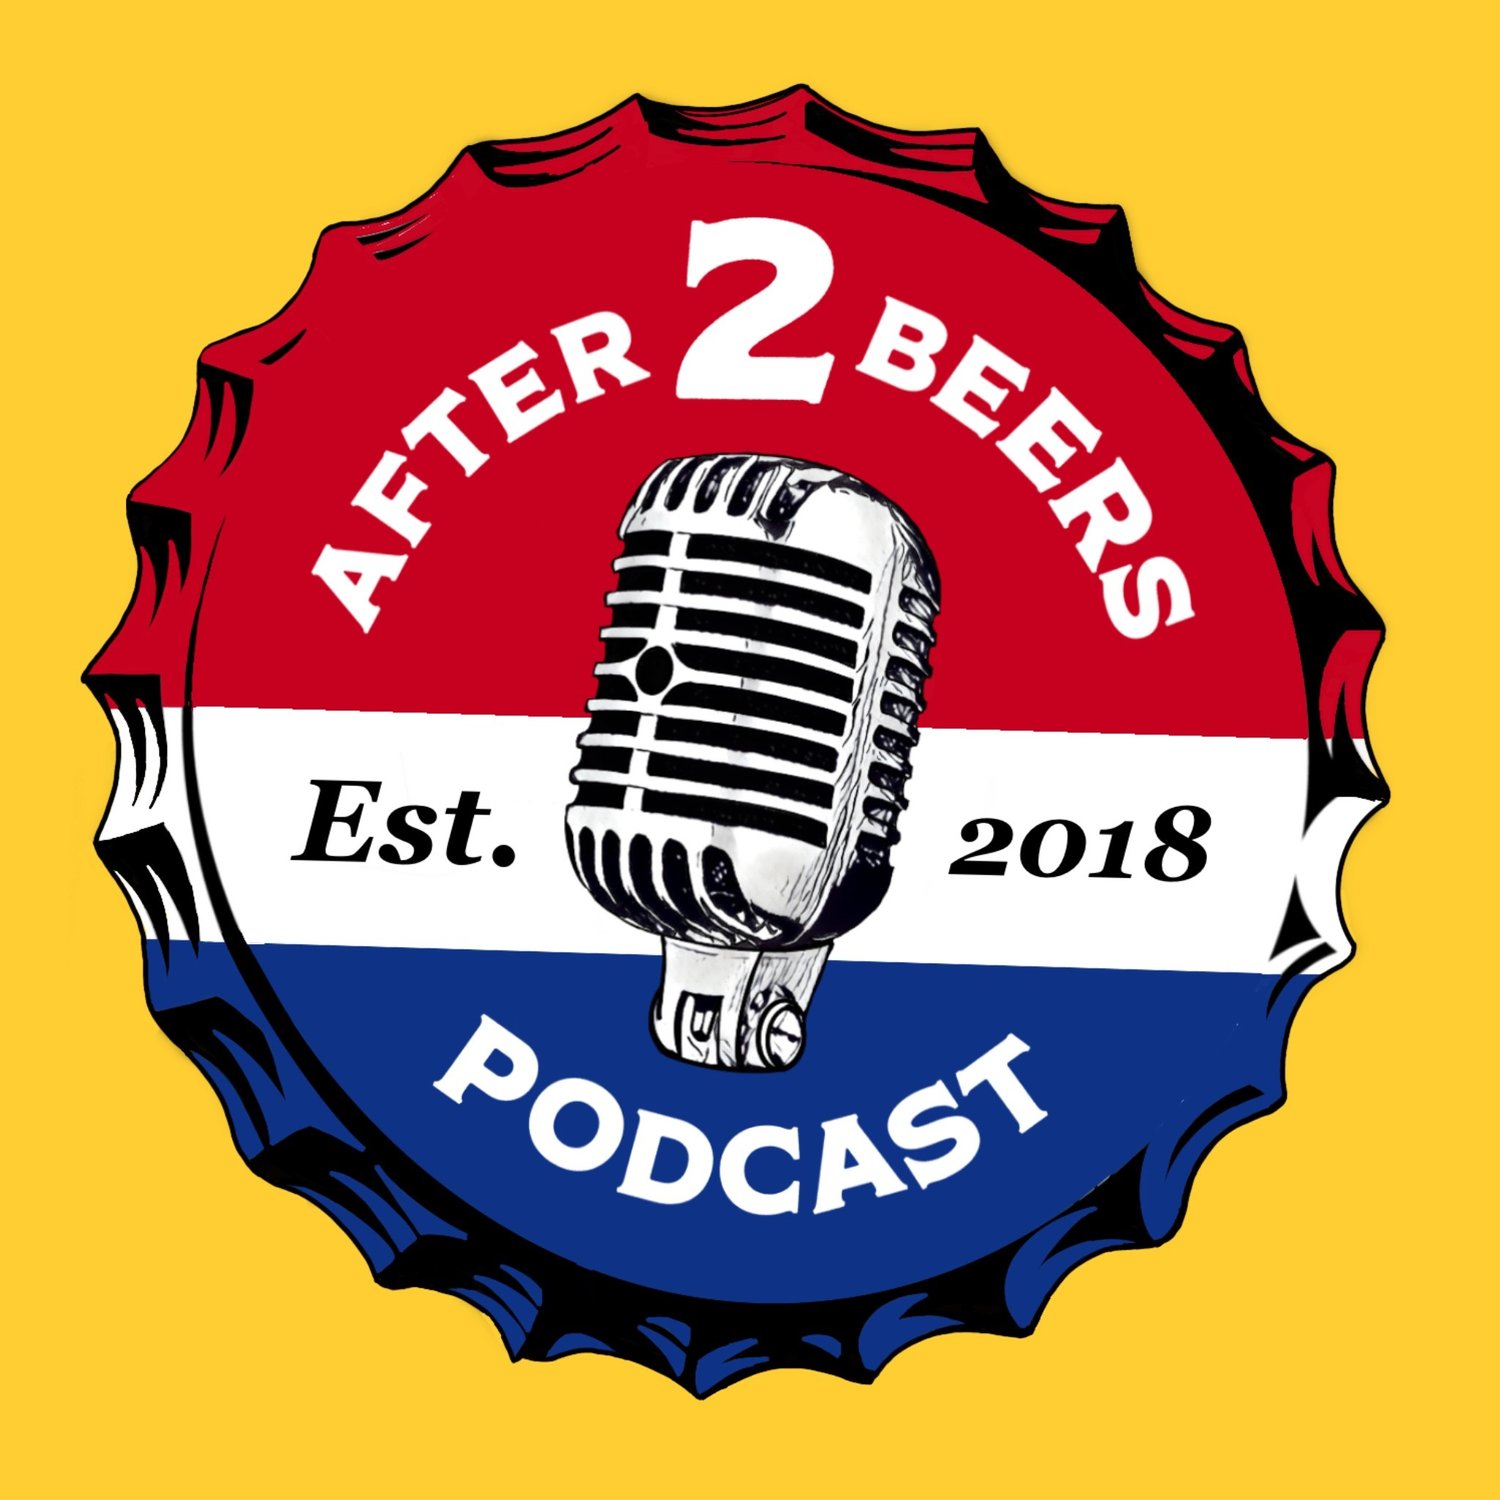 After 2 Beers Podcast